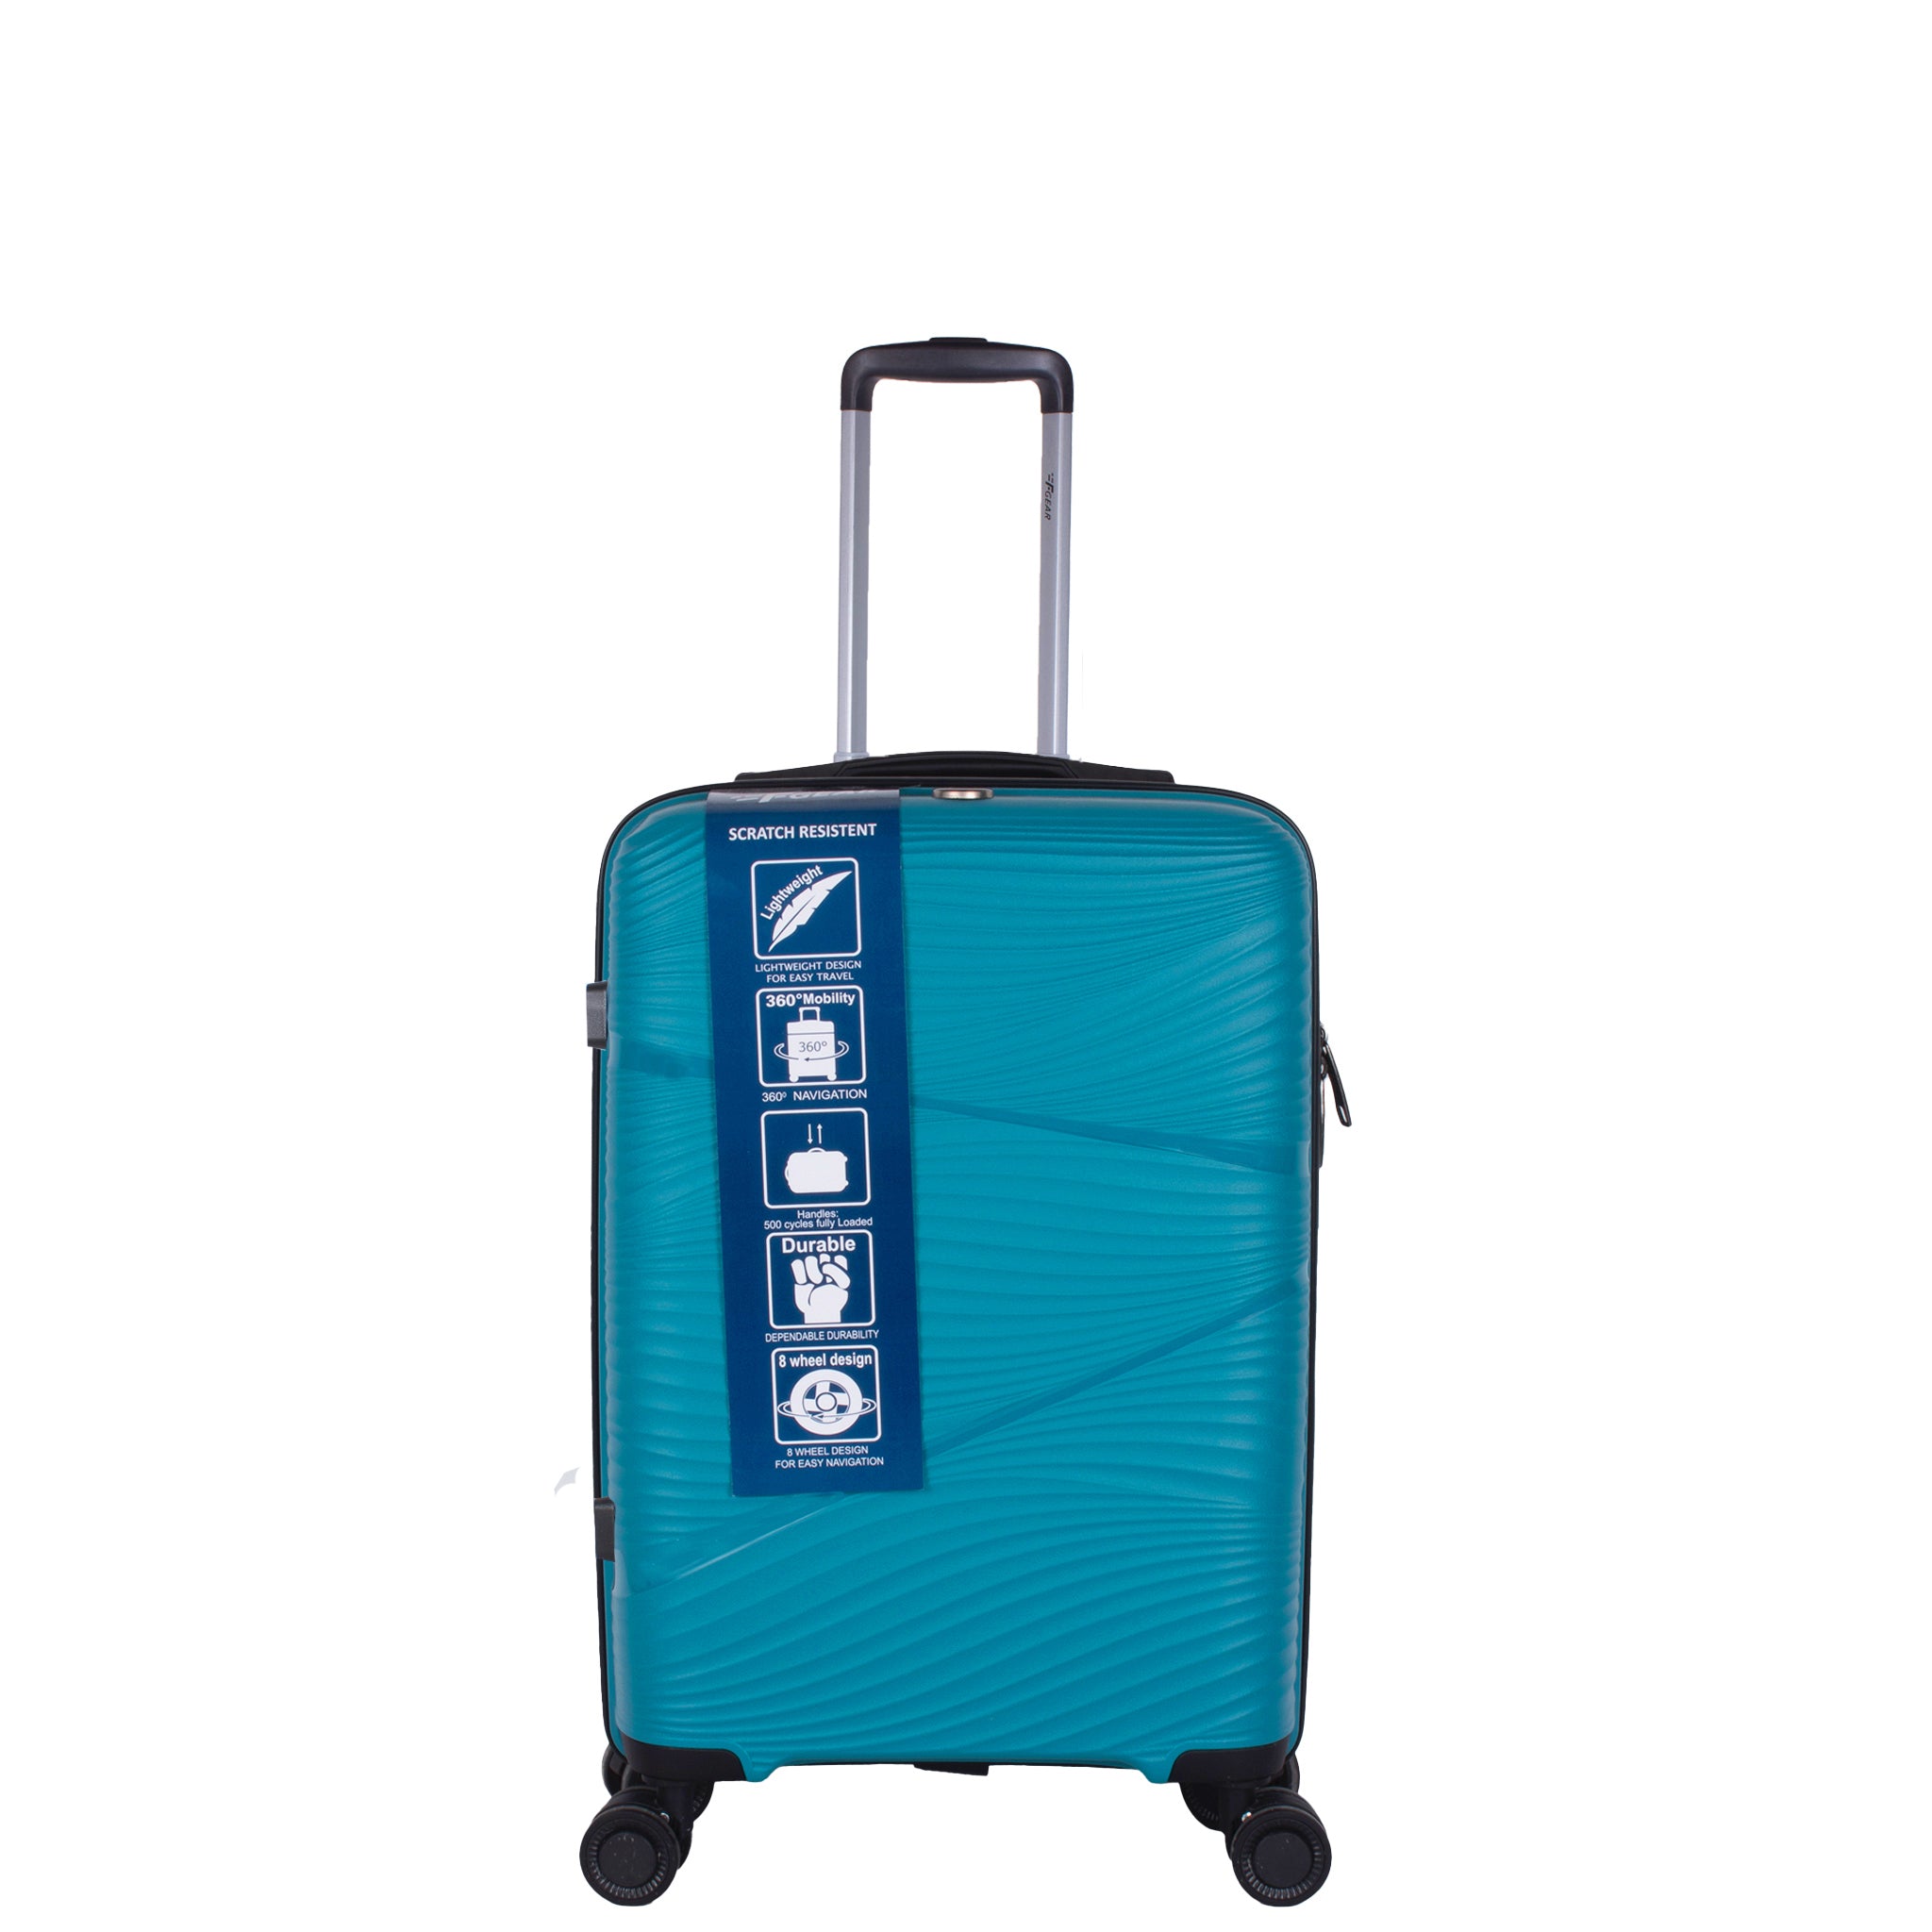 Luggage Suitcases  Travel Bags in All Sizes  Zaappy  2 Years Warranty   wwwzaappycom